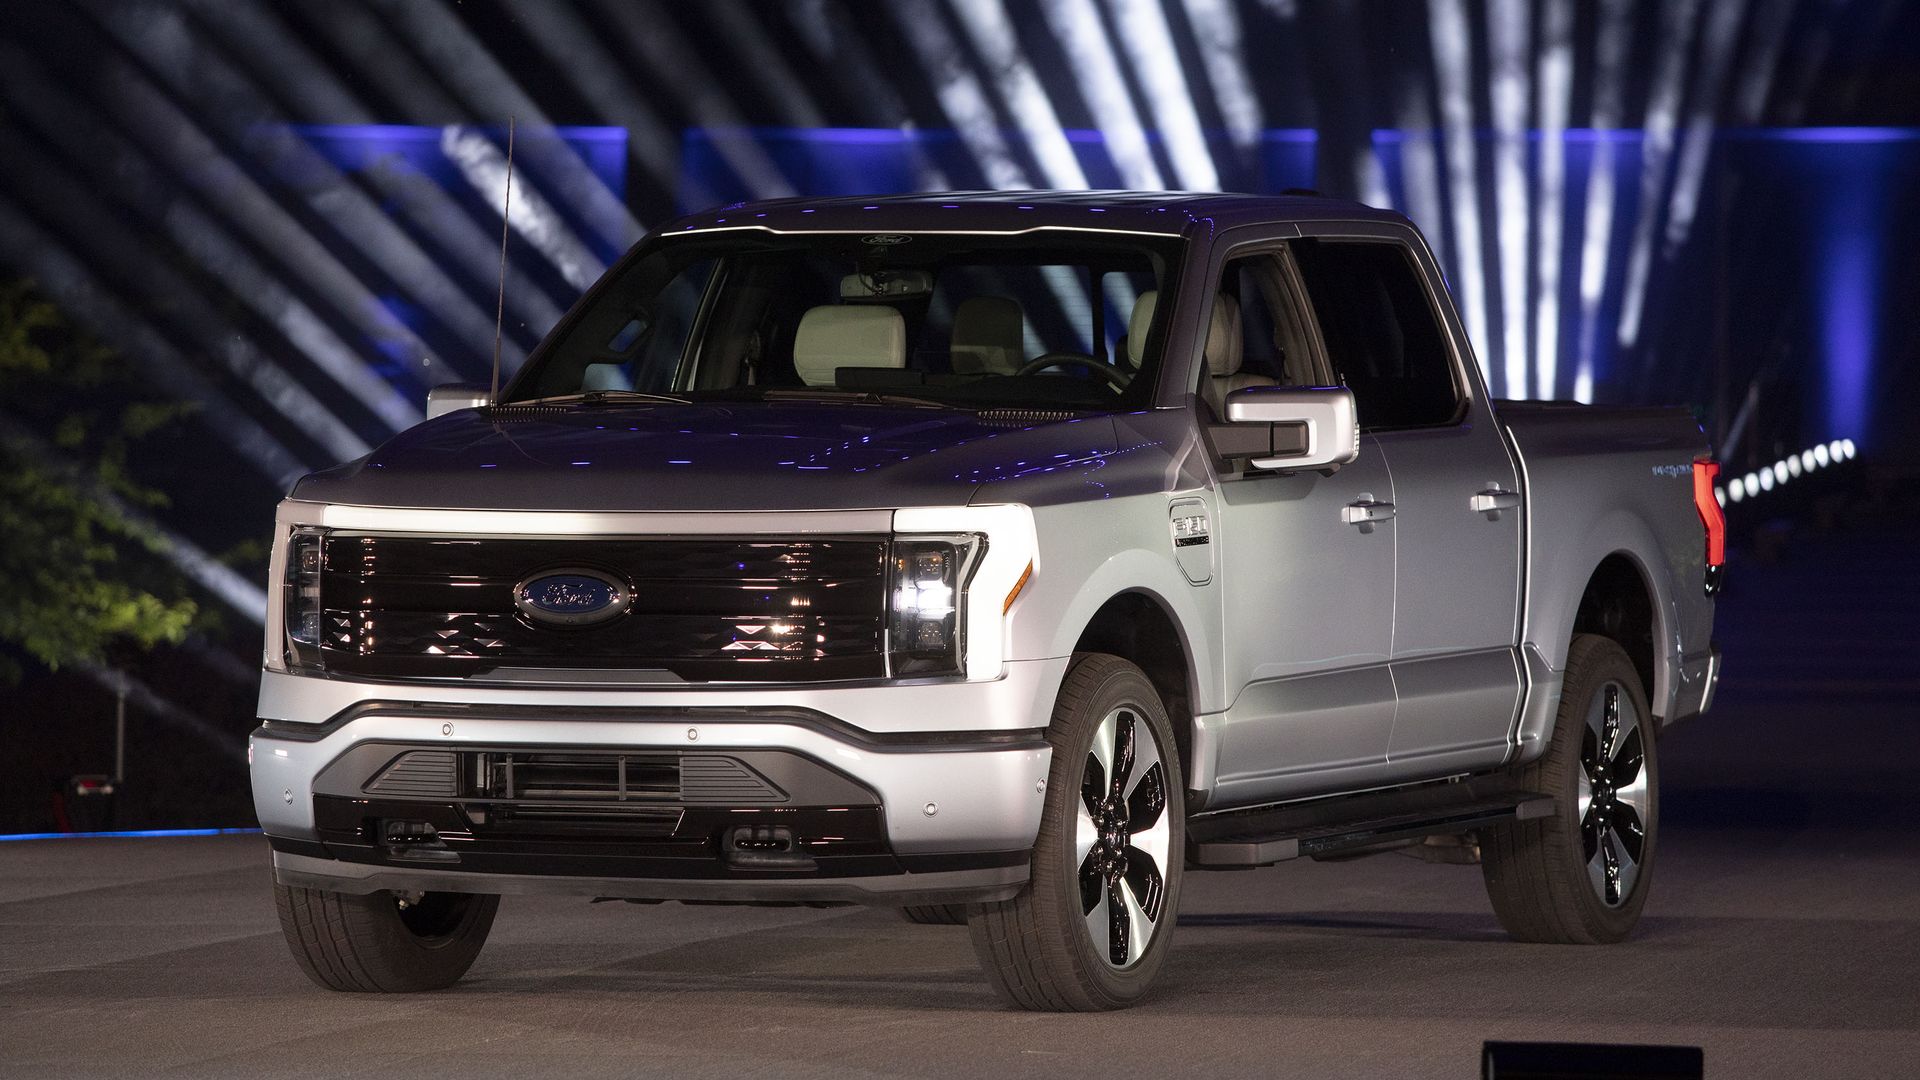 Picture of a silver Ford F-150